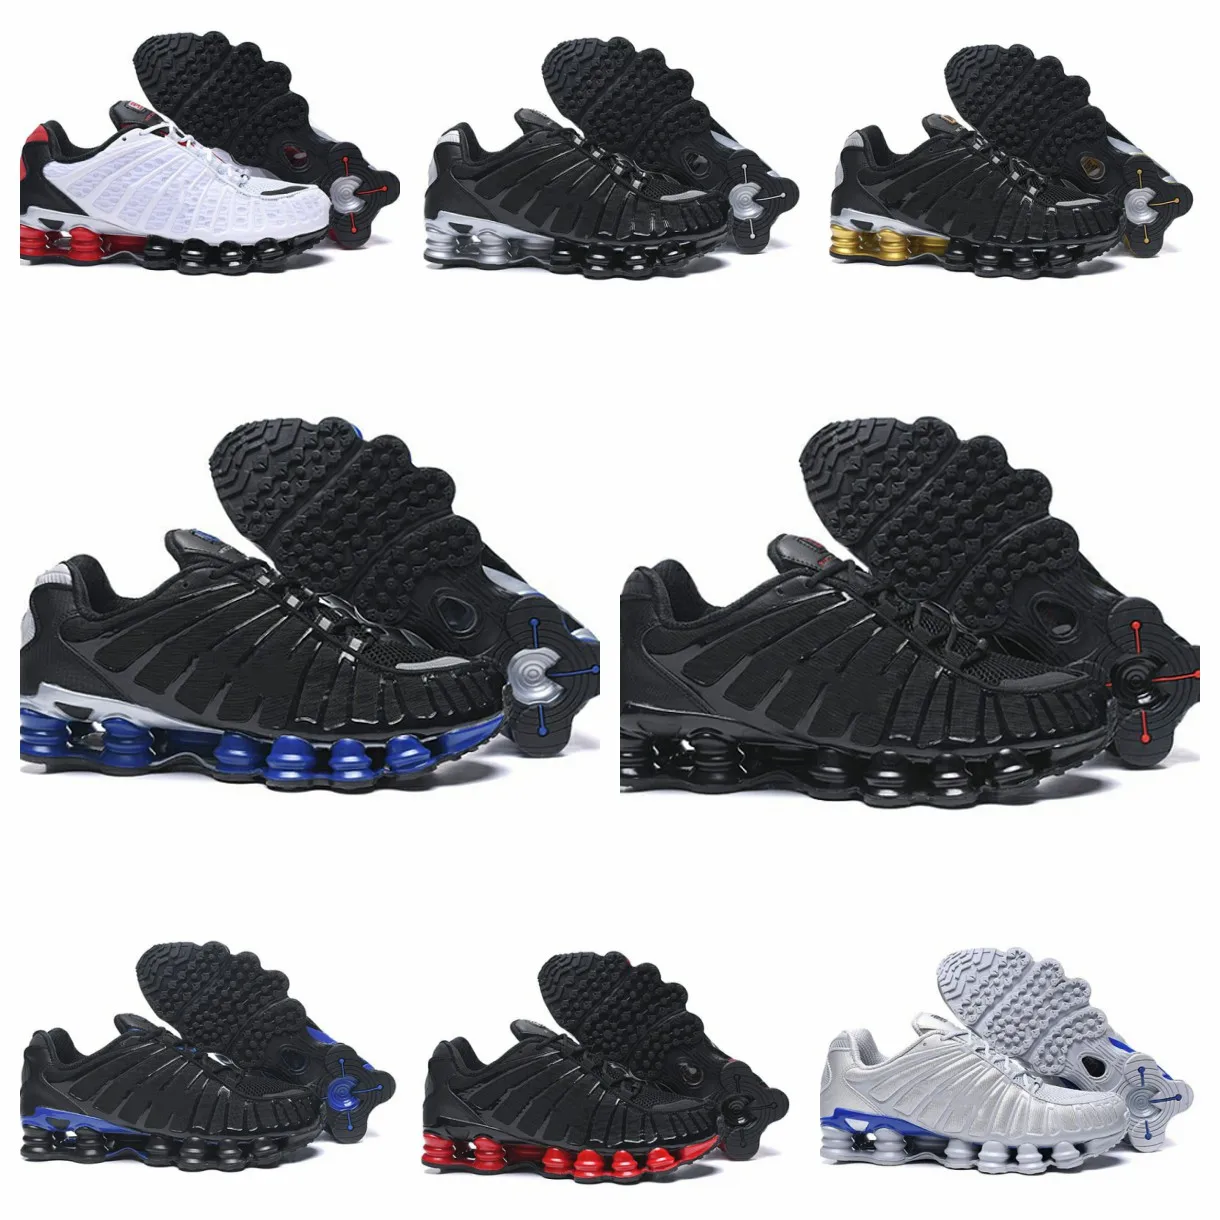 

2021 Running Shoes Men Classic Chaussures Triple Black White Grey Clay Orange Red Trainer Casual Sports Outdoor Sneakers 1308